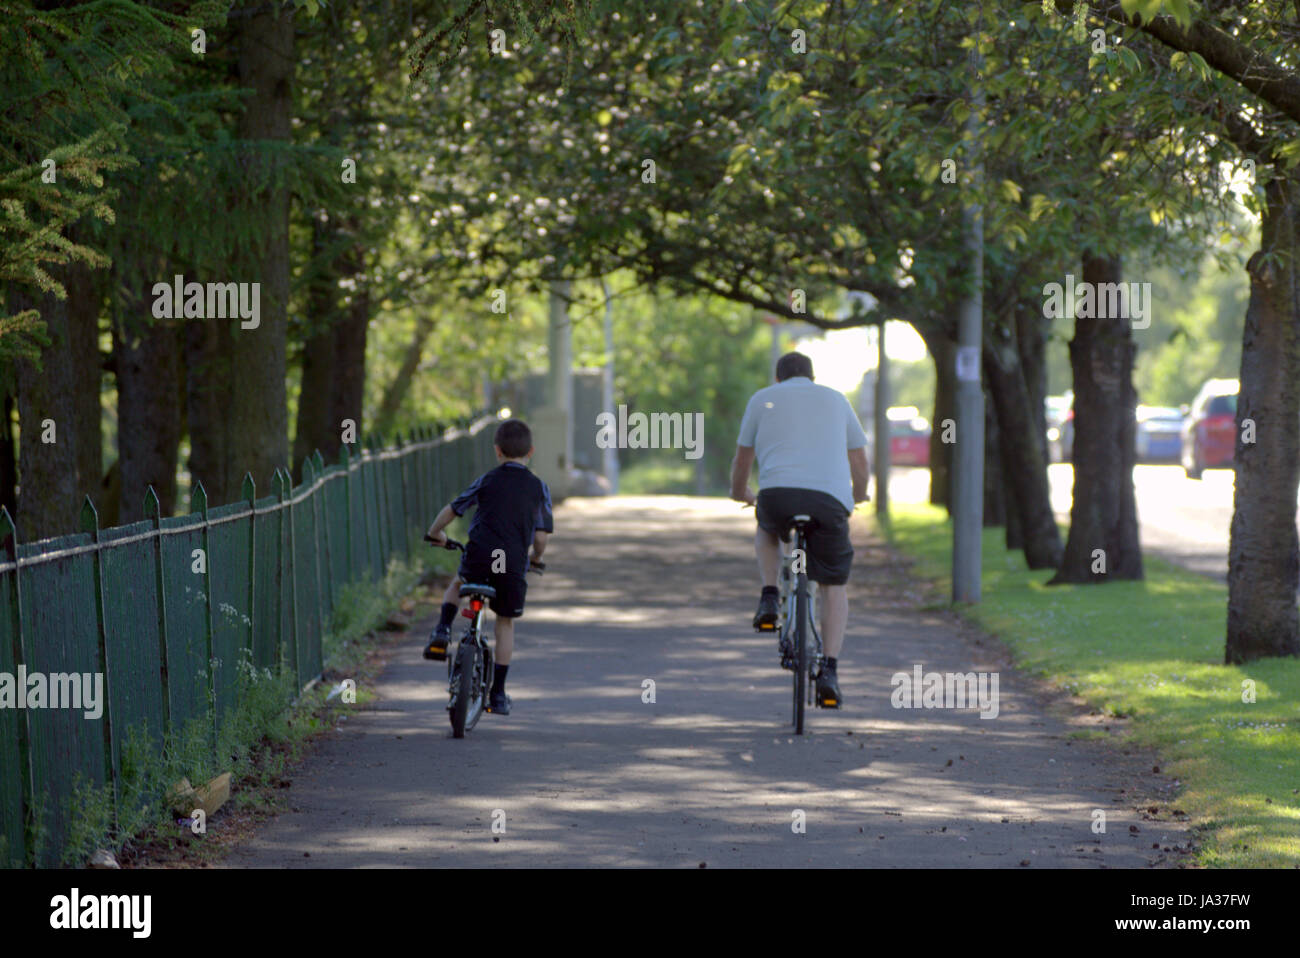 father and son cycle on bikes on path tree lined Stock Photo